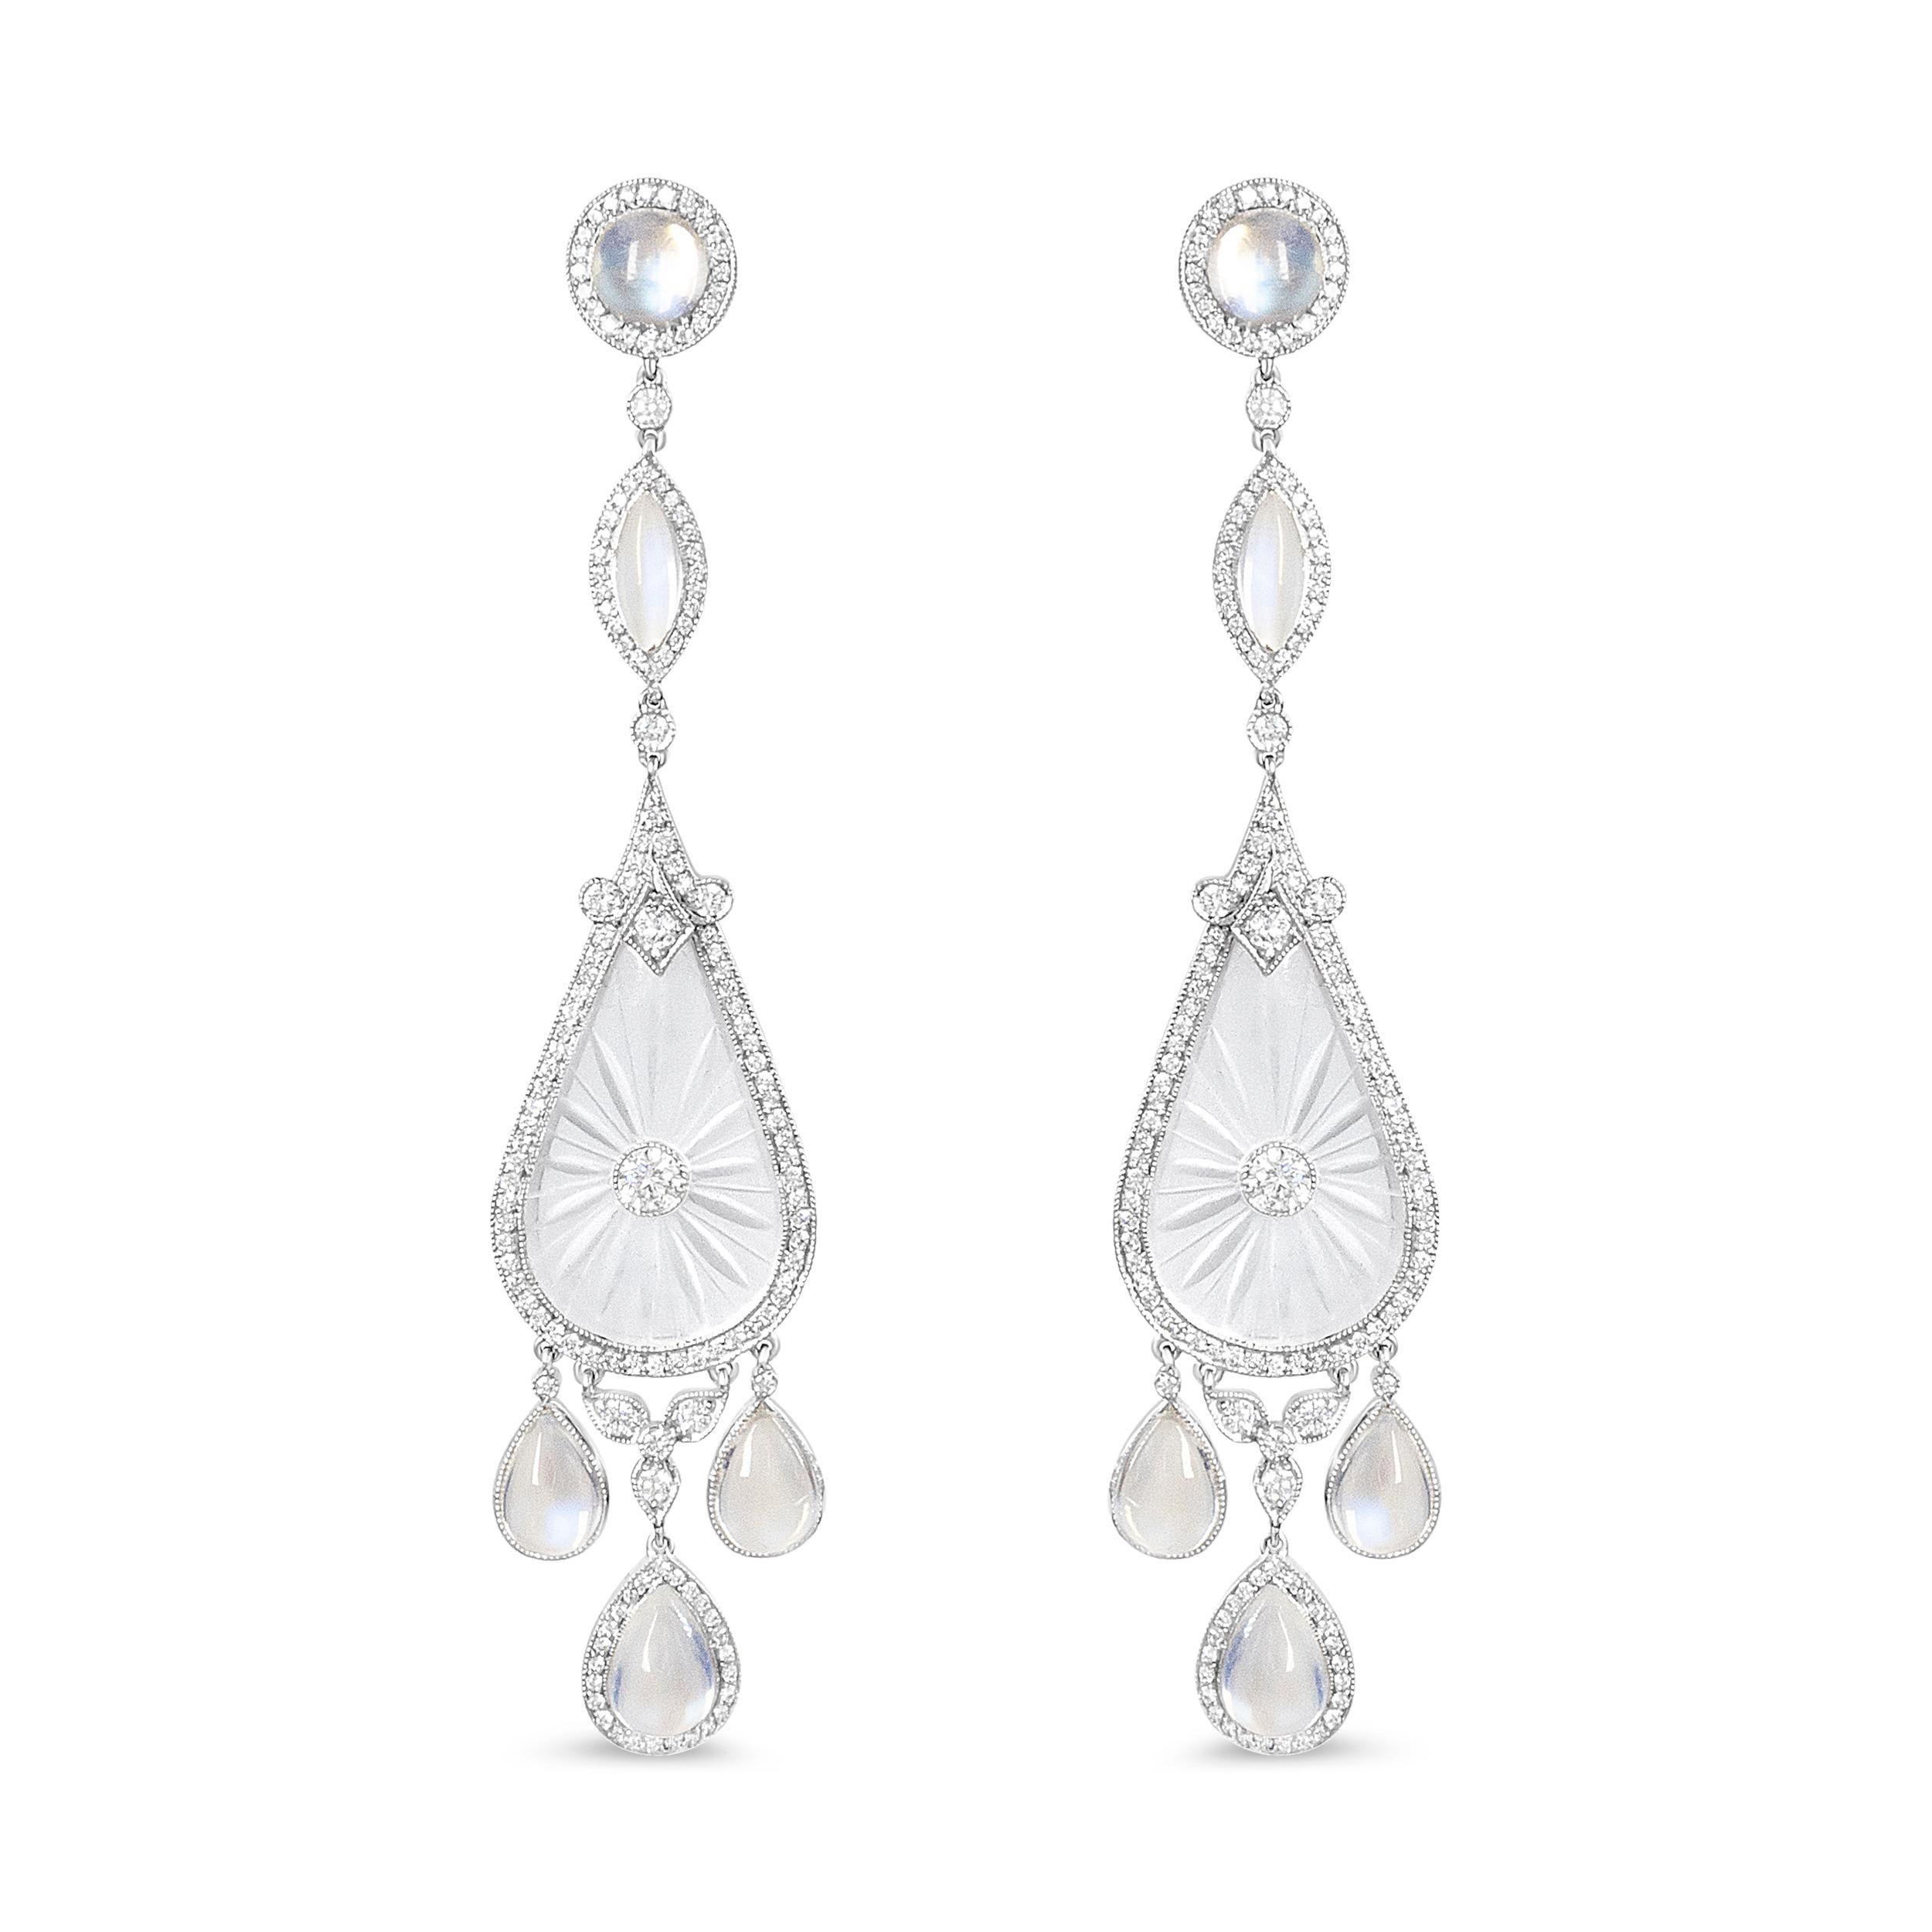 Enriched with intricate details, these unique earrings are the show-stopping accessory you've been long been searching! This alluring pair features a balanced combination of diamonds, alongside beautiful rock crystal and moon stone. Featured within